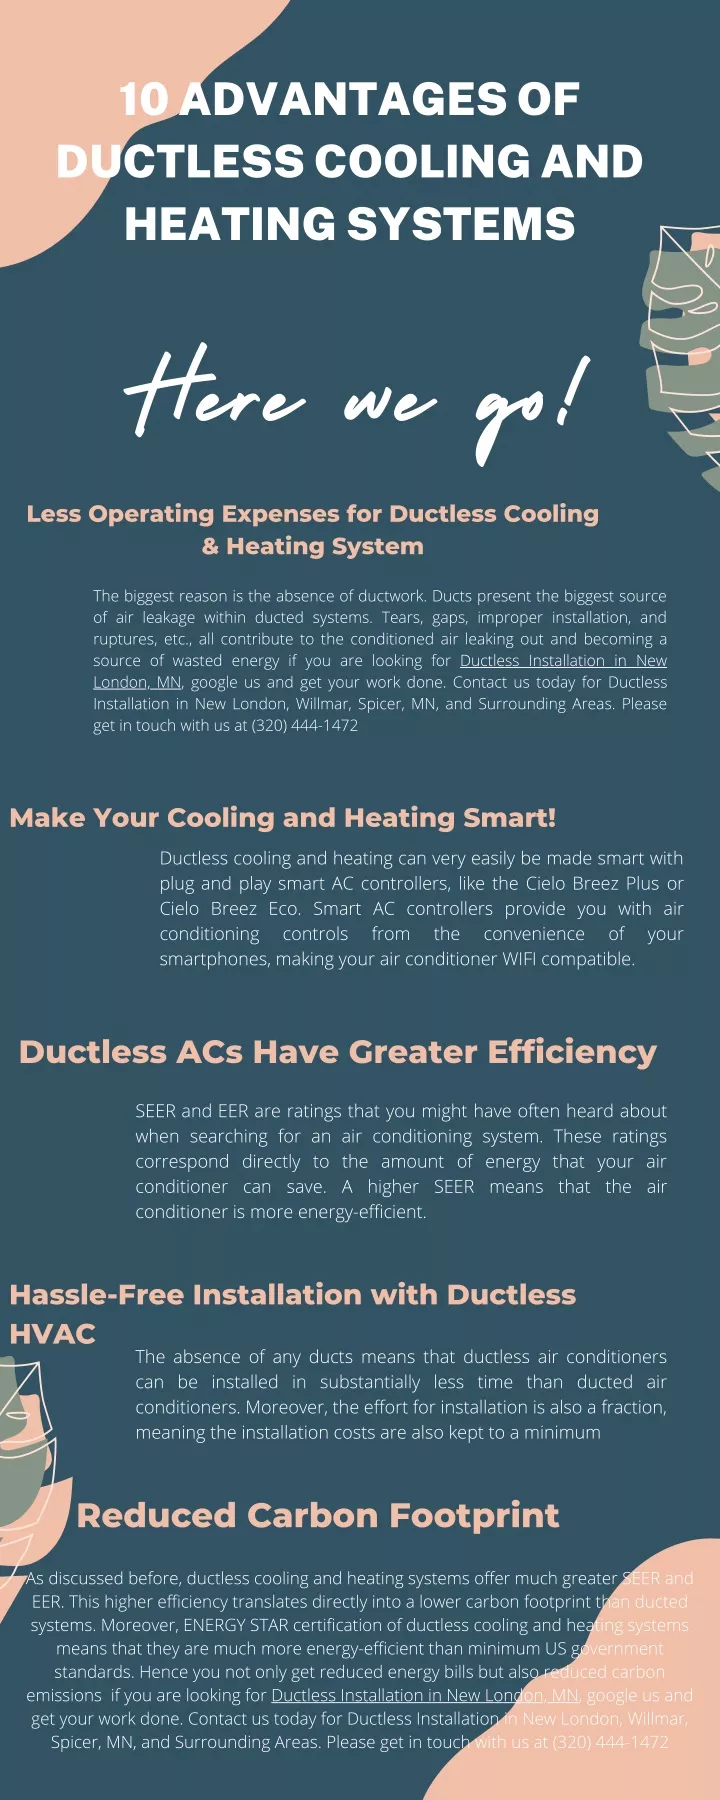 10 advantages of ductless cooling and heating